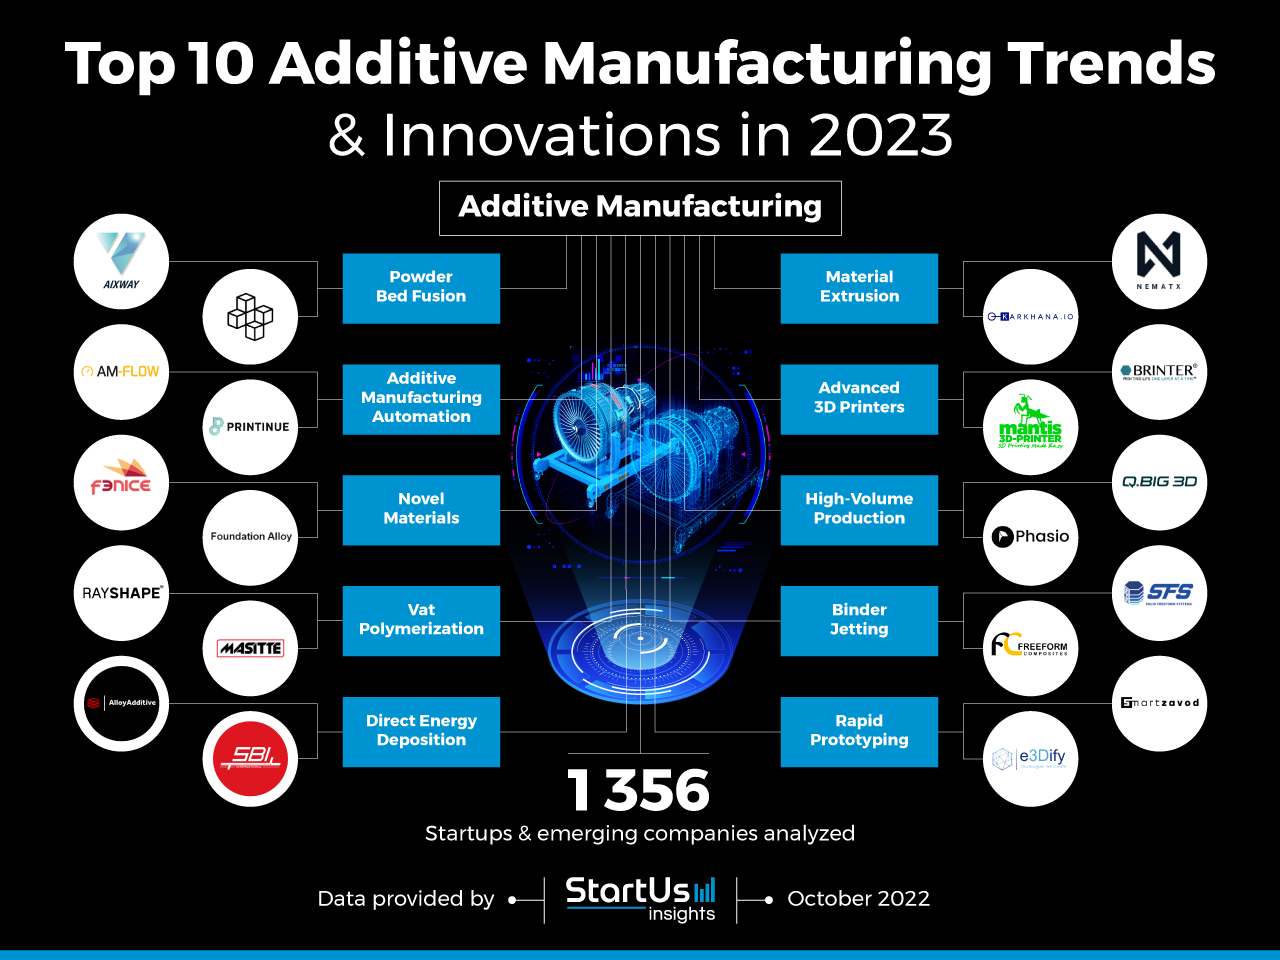 3D Printing Innovations: Whats New In 3D Printing And Additive Manufacturing? Applications